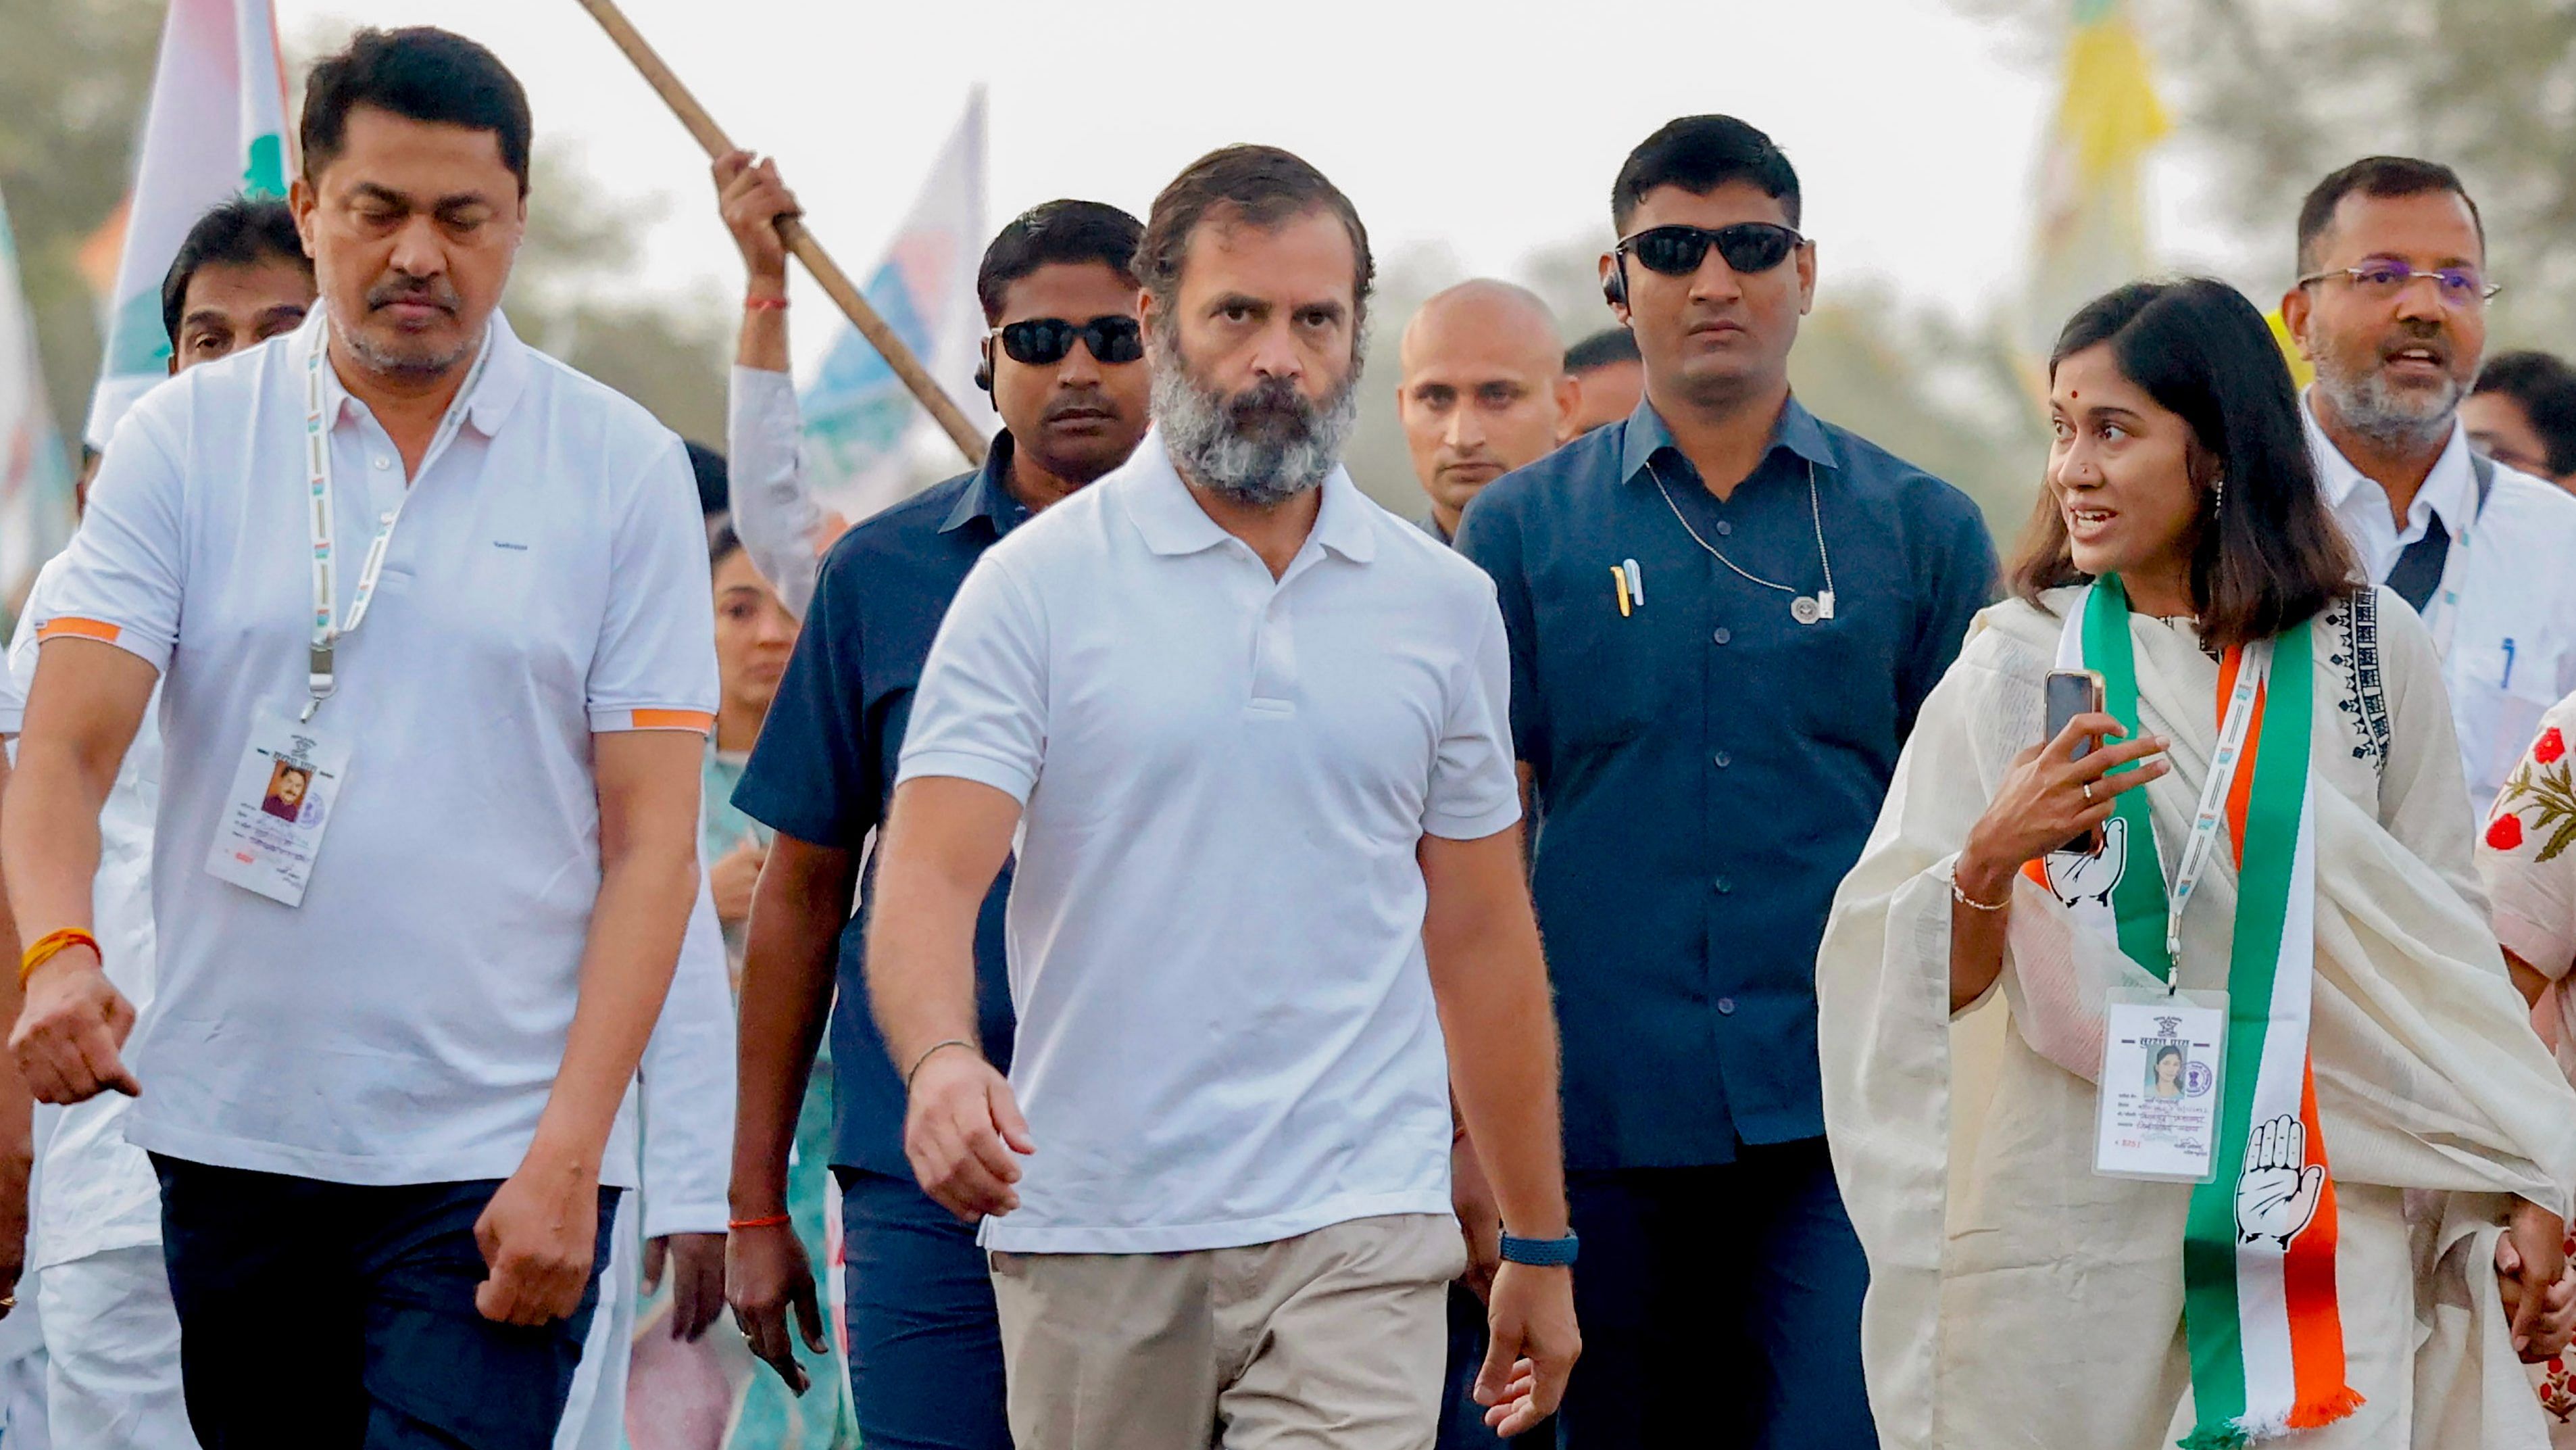 Rahul Gandhi with supporters during the 'Bharat Jodo Yatra' in Nanded. Credit: PTI Photo